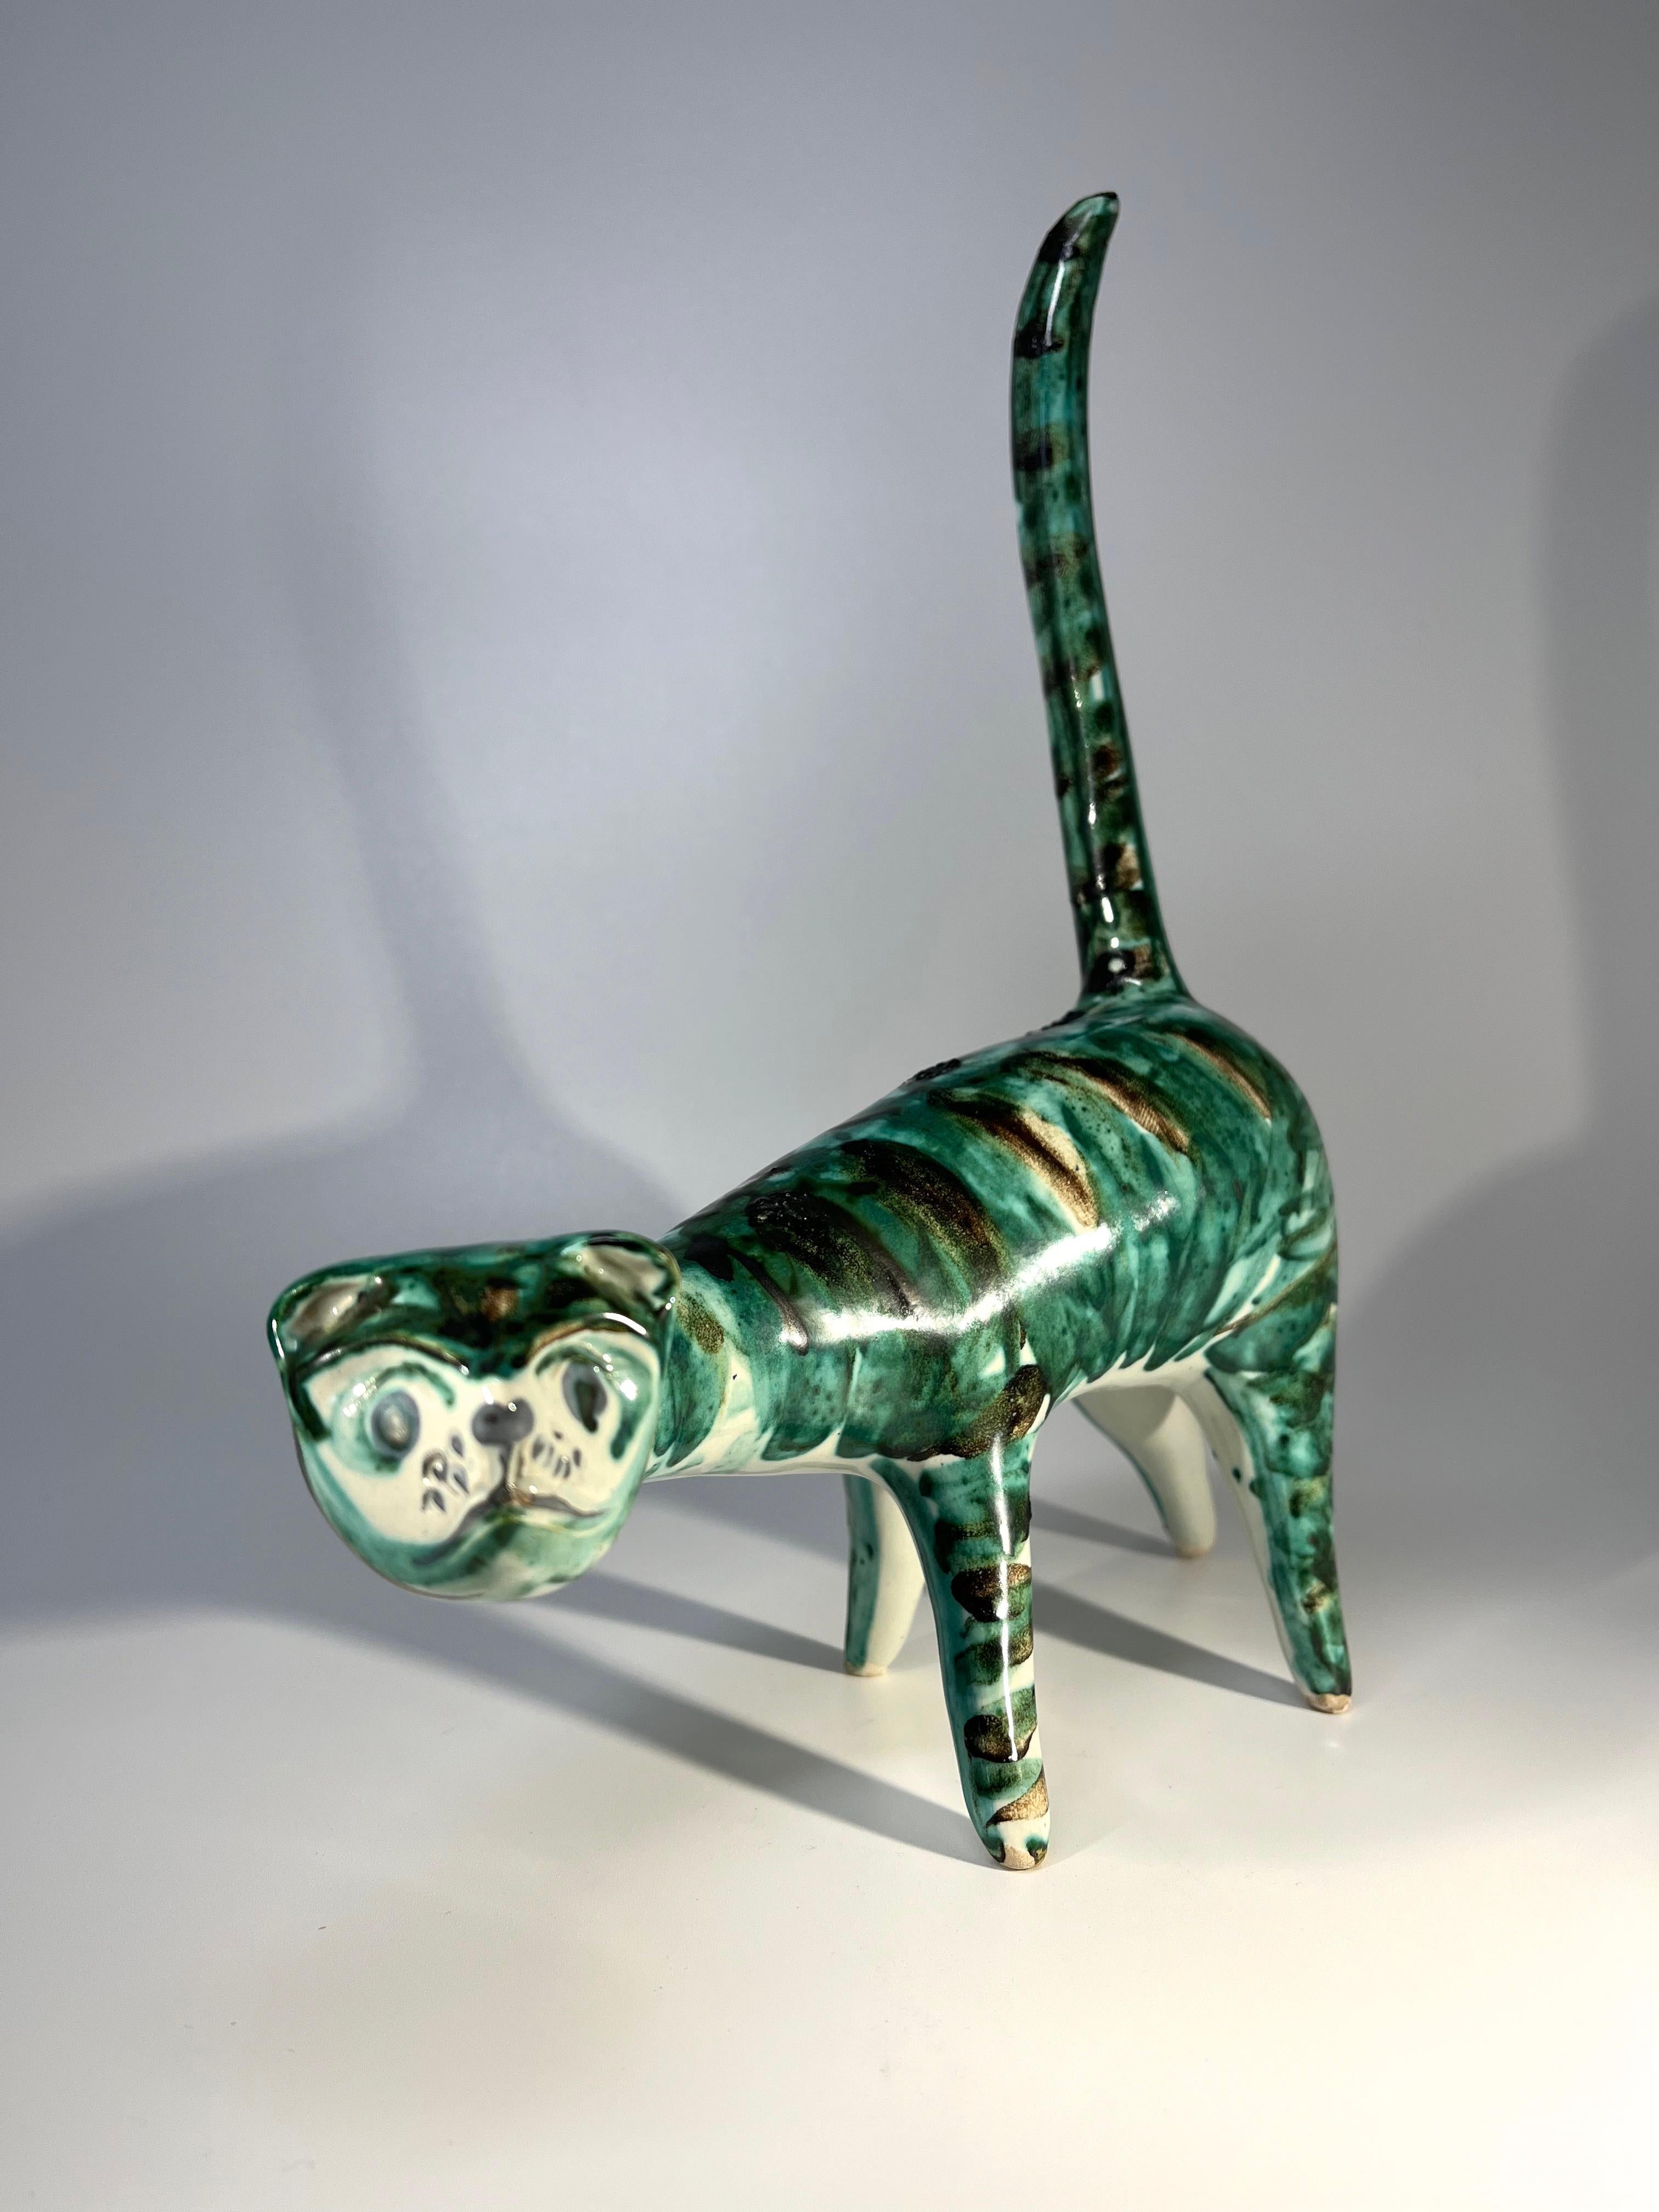 Extraordinary ceramic feline sculpture attributed to Alessio Tasca of Nove, Italy
Strangely elongated neck, startled facial expression and erect tail add to the draw of this piece
Likely created for Raymor, who specialised in mid-century decorative